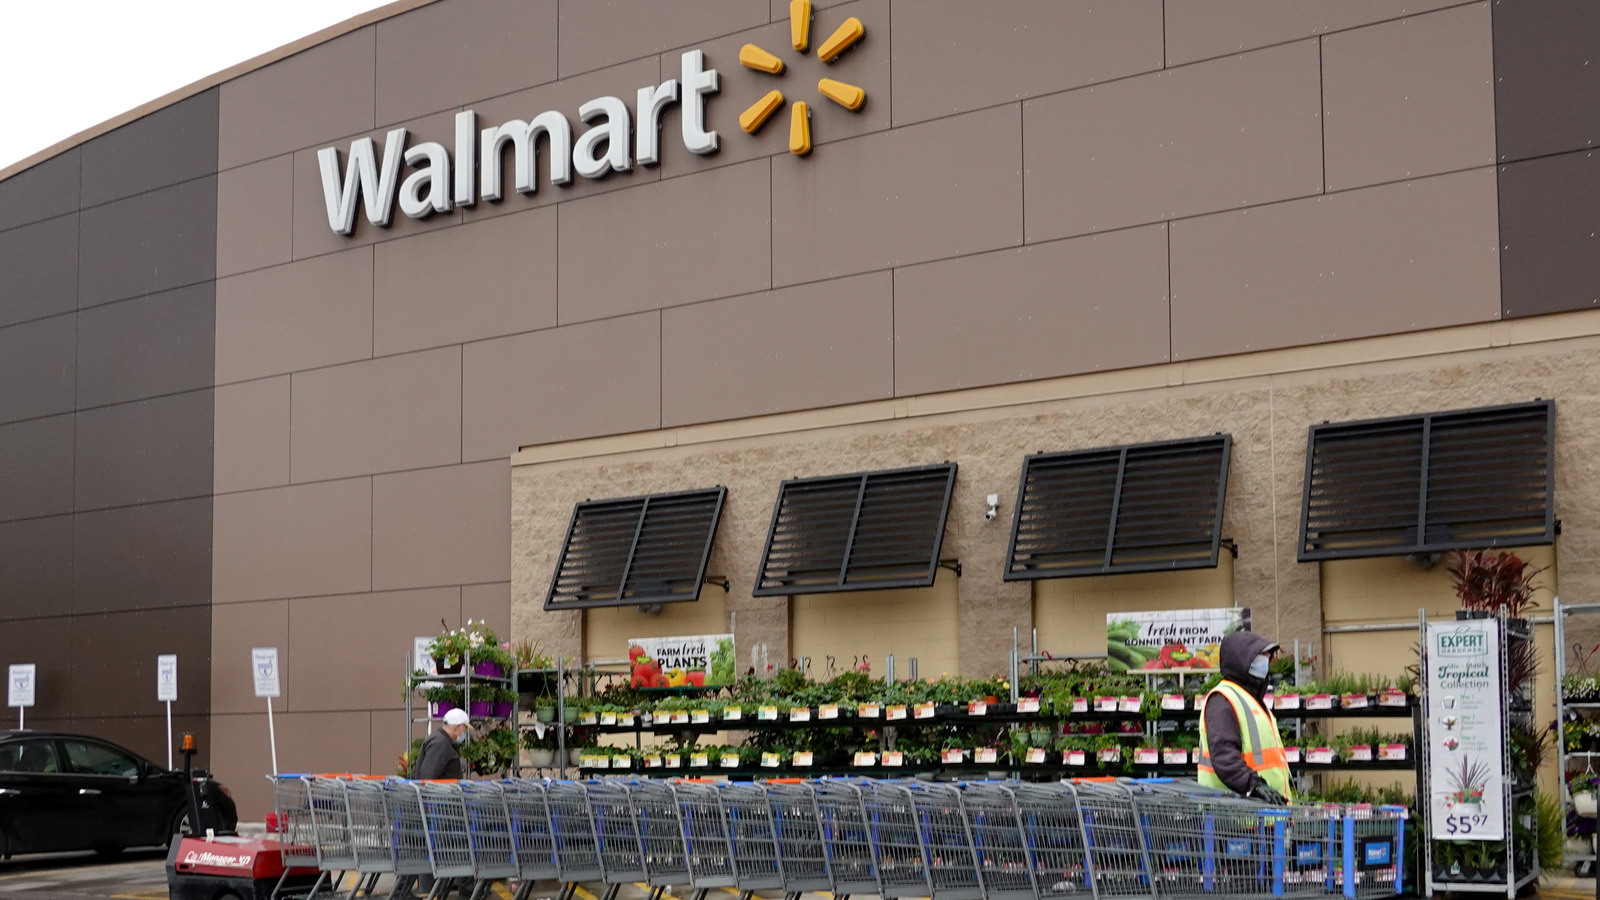 The Best Time to Shop at Walmart, According to Experts